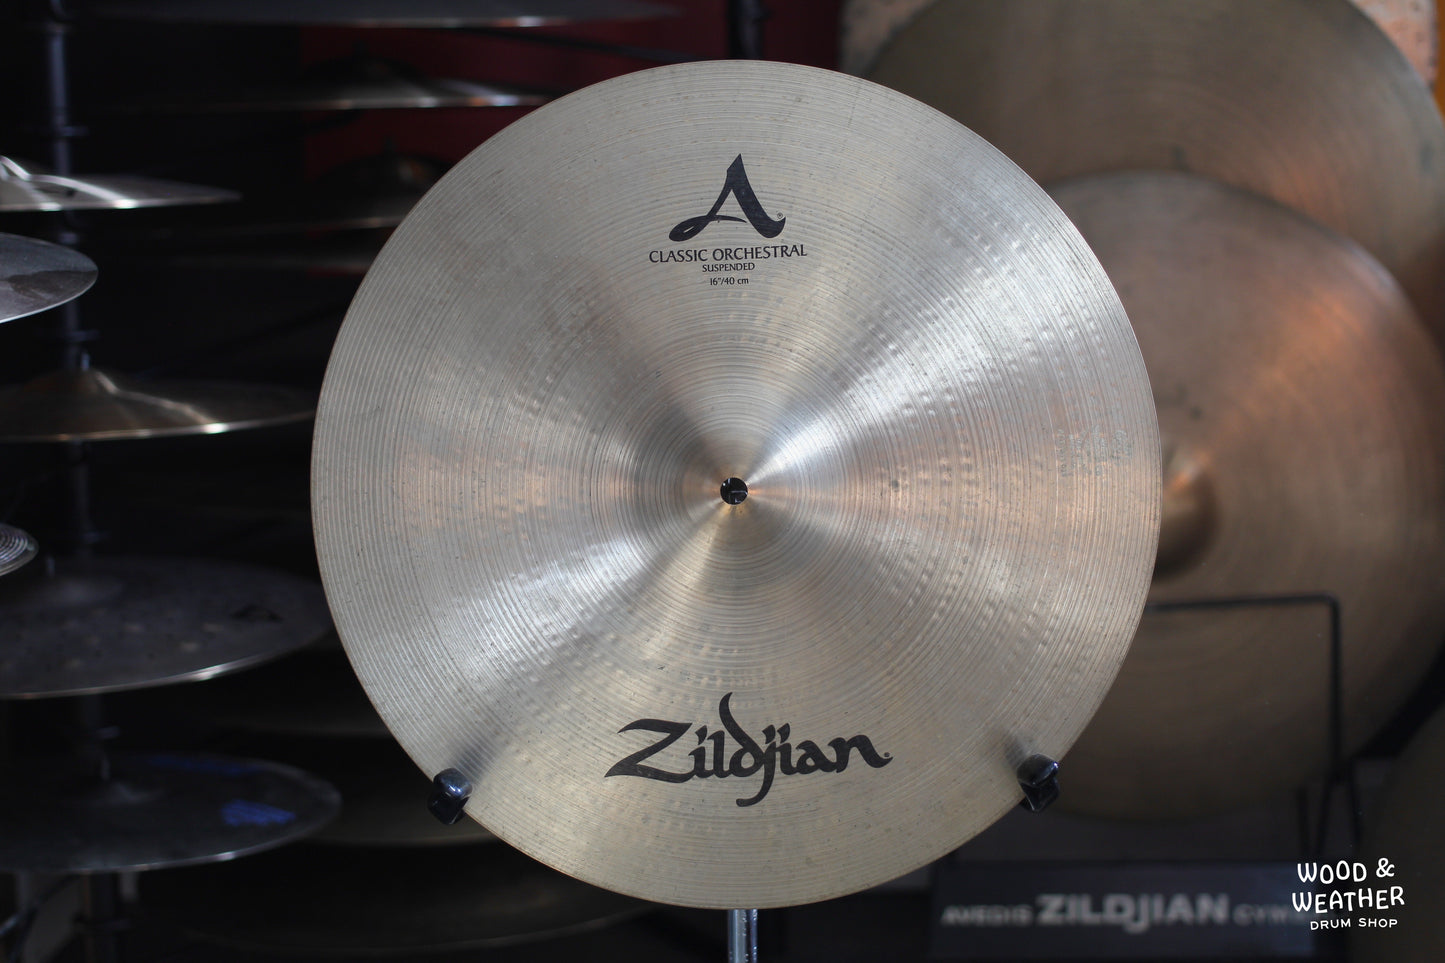 Used Zildjian 16" A Classic Orchestral Suspended Cymbal 1160g